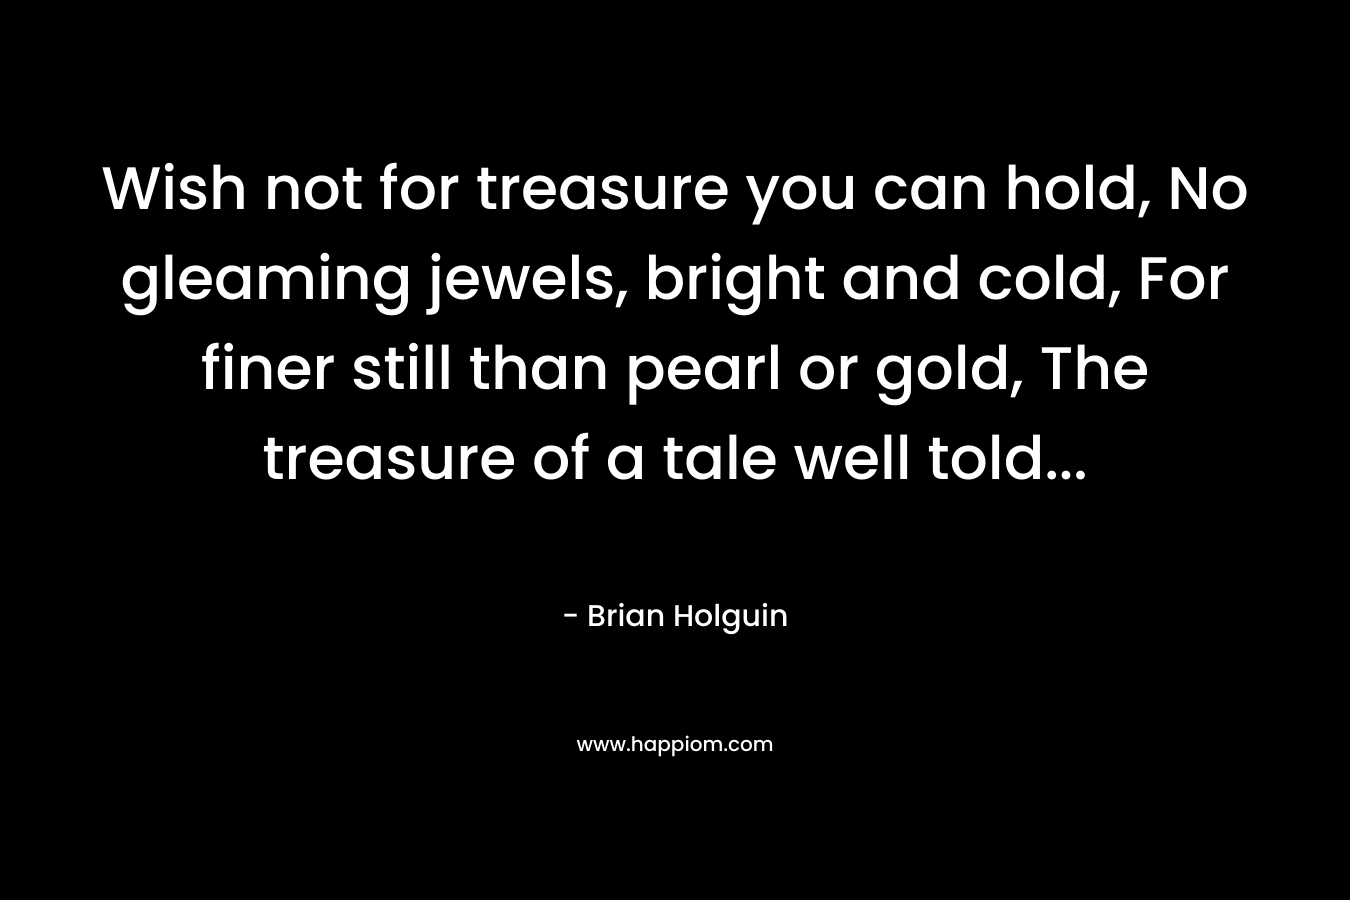 Wish not for treasure you can hold, No gleaming jewels, bright and cold, For finer still than pearl or gold, The treasure of a tale well told… – Brian Holguin